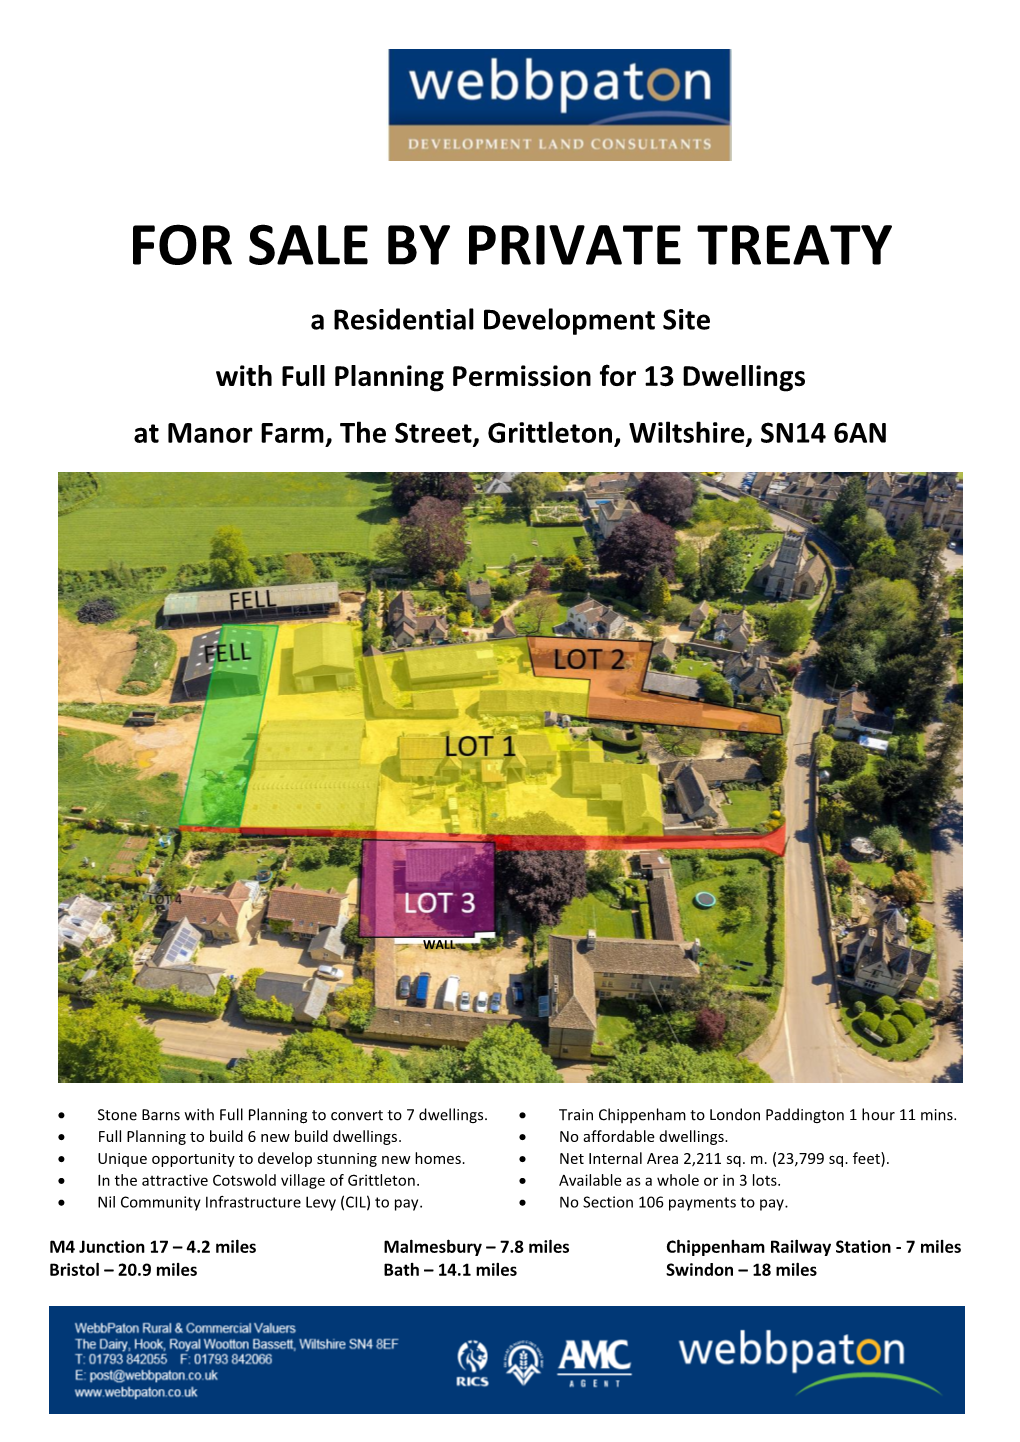 FOR SALE by PRIVATE TREATY a Residential Development Site with Full Planning Permission for 13 Dwellings at Manor Farm, the Street, Grittleton, Wiltshire, SN14 6AN